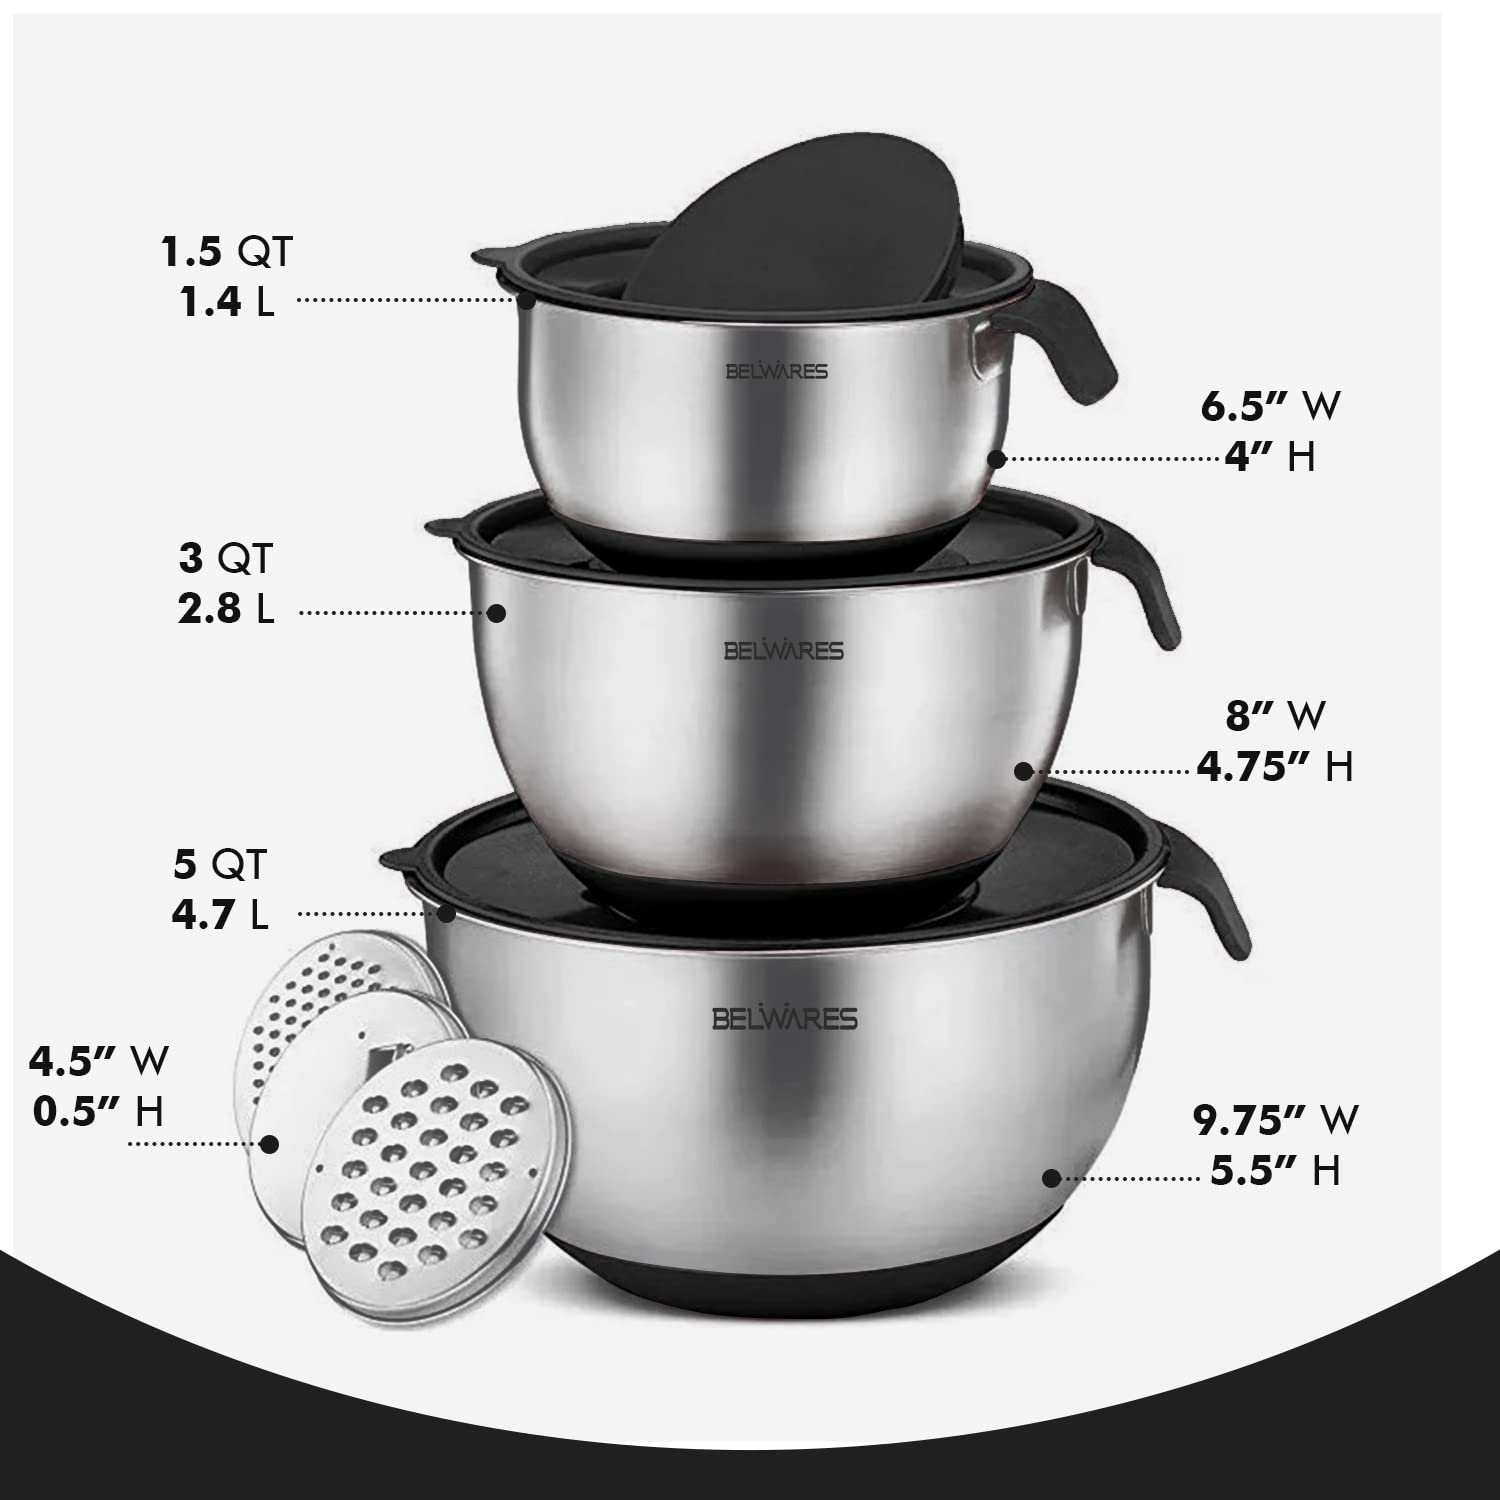 Belwares Mixing Bowls with Lids Set - Nesting Bowls with Graters, Handle, Pour Spout, Airtight Lids - Stainless Steel Non-Slip Mixing Bowl for Cooking, Baking, Prepping, Food Storage  - Like New